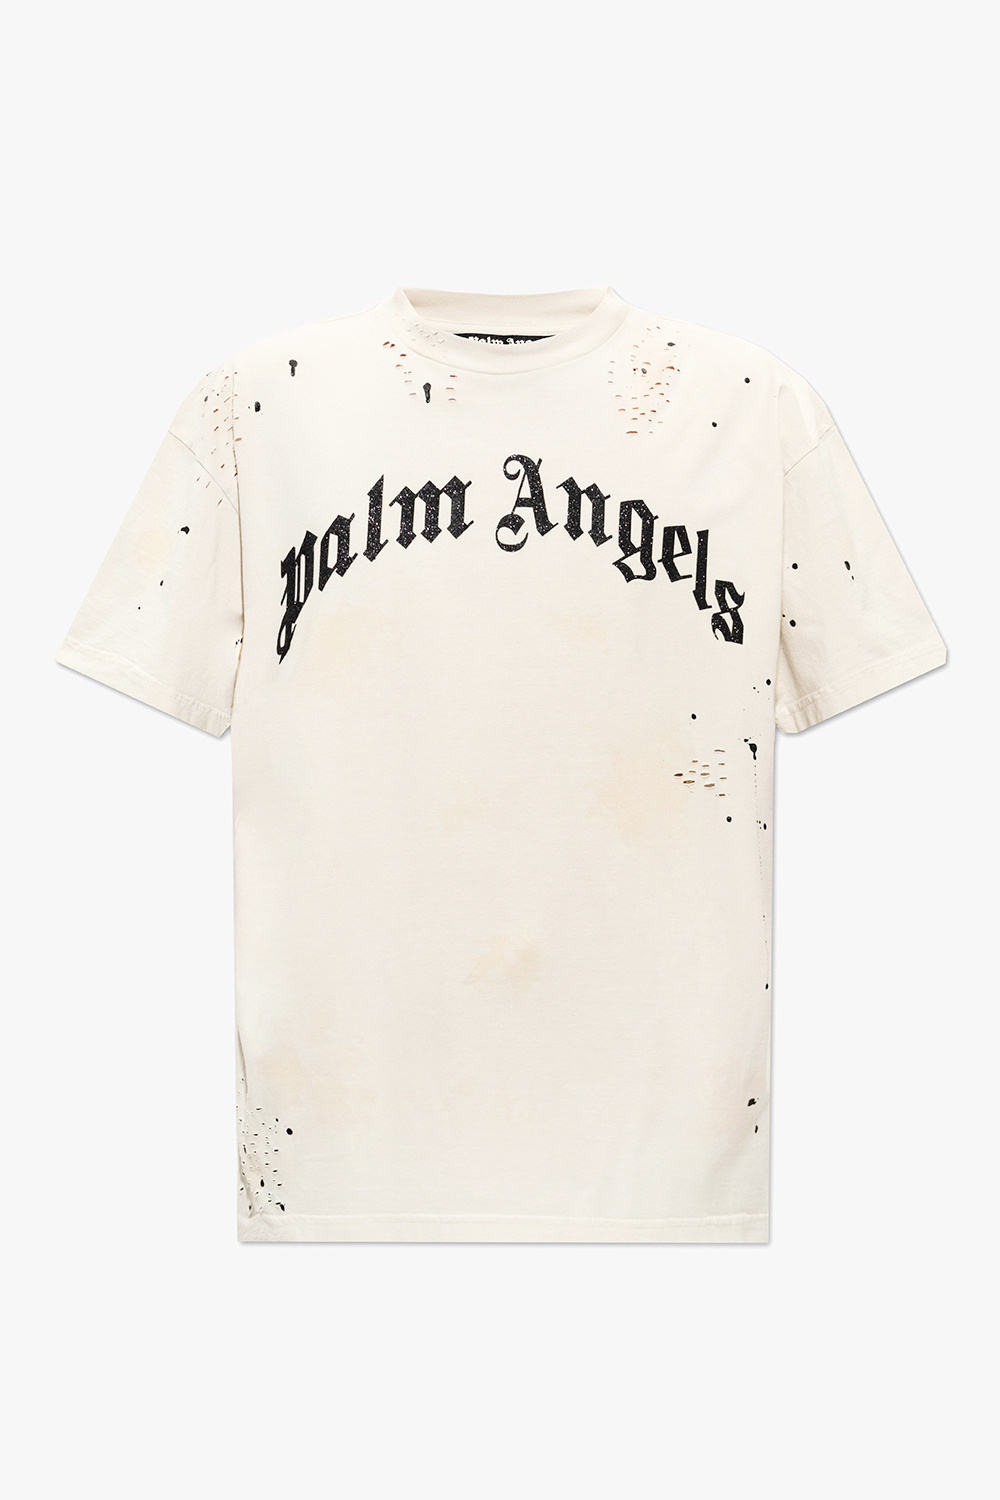 Palm Angels Young Girls Clothing Collection